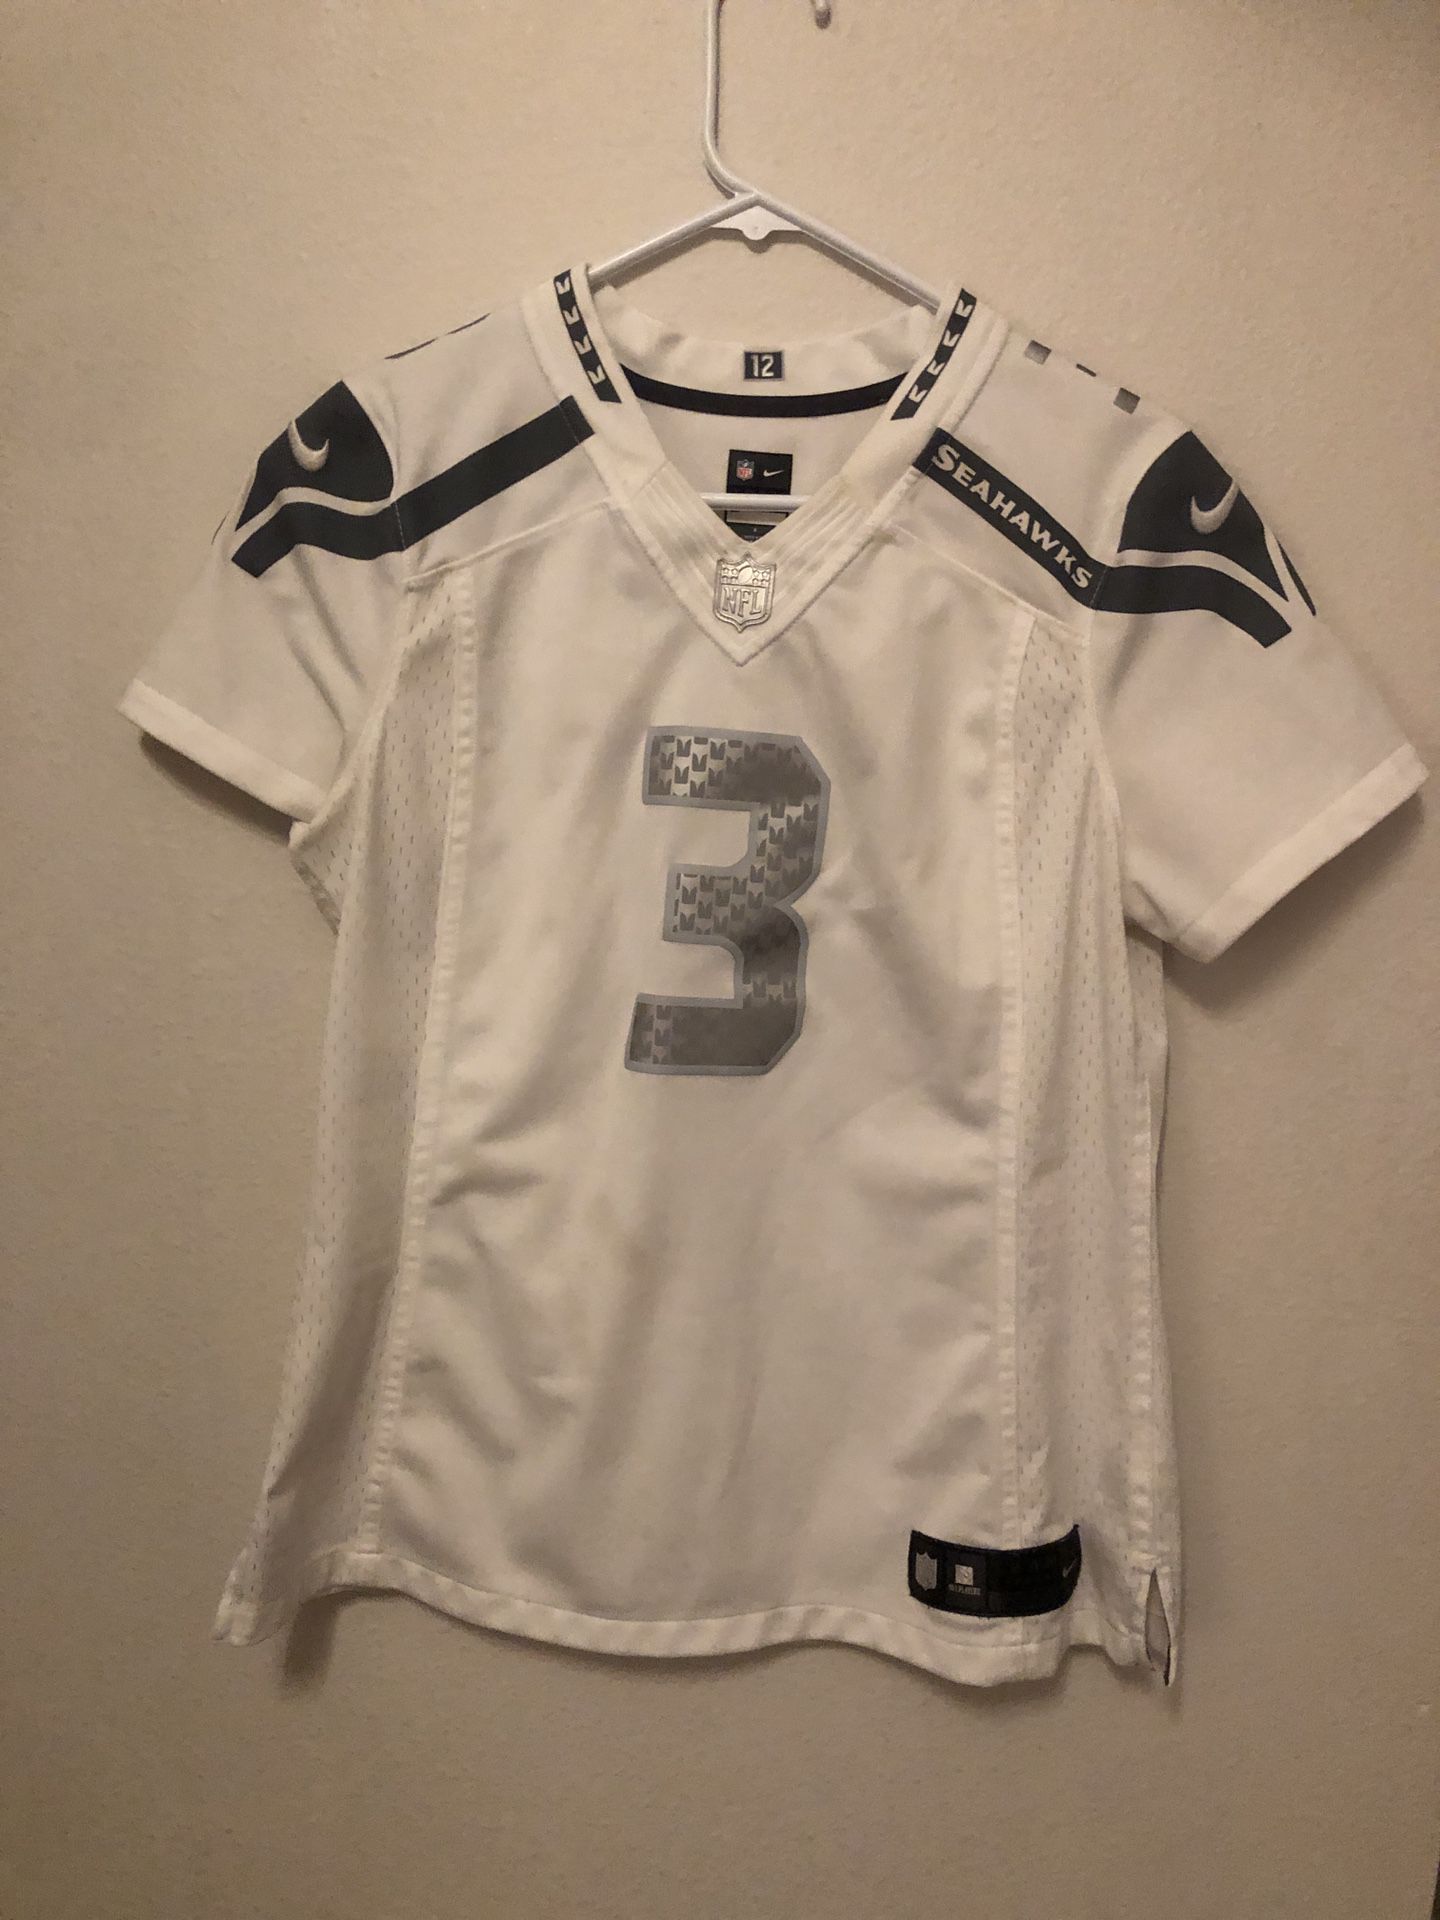 Authentic Seattle Seahawks Jersey